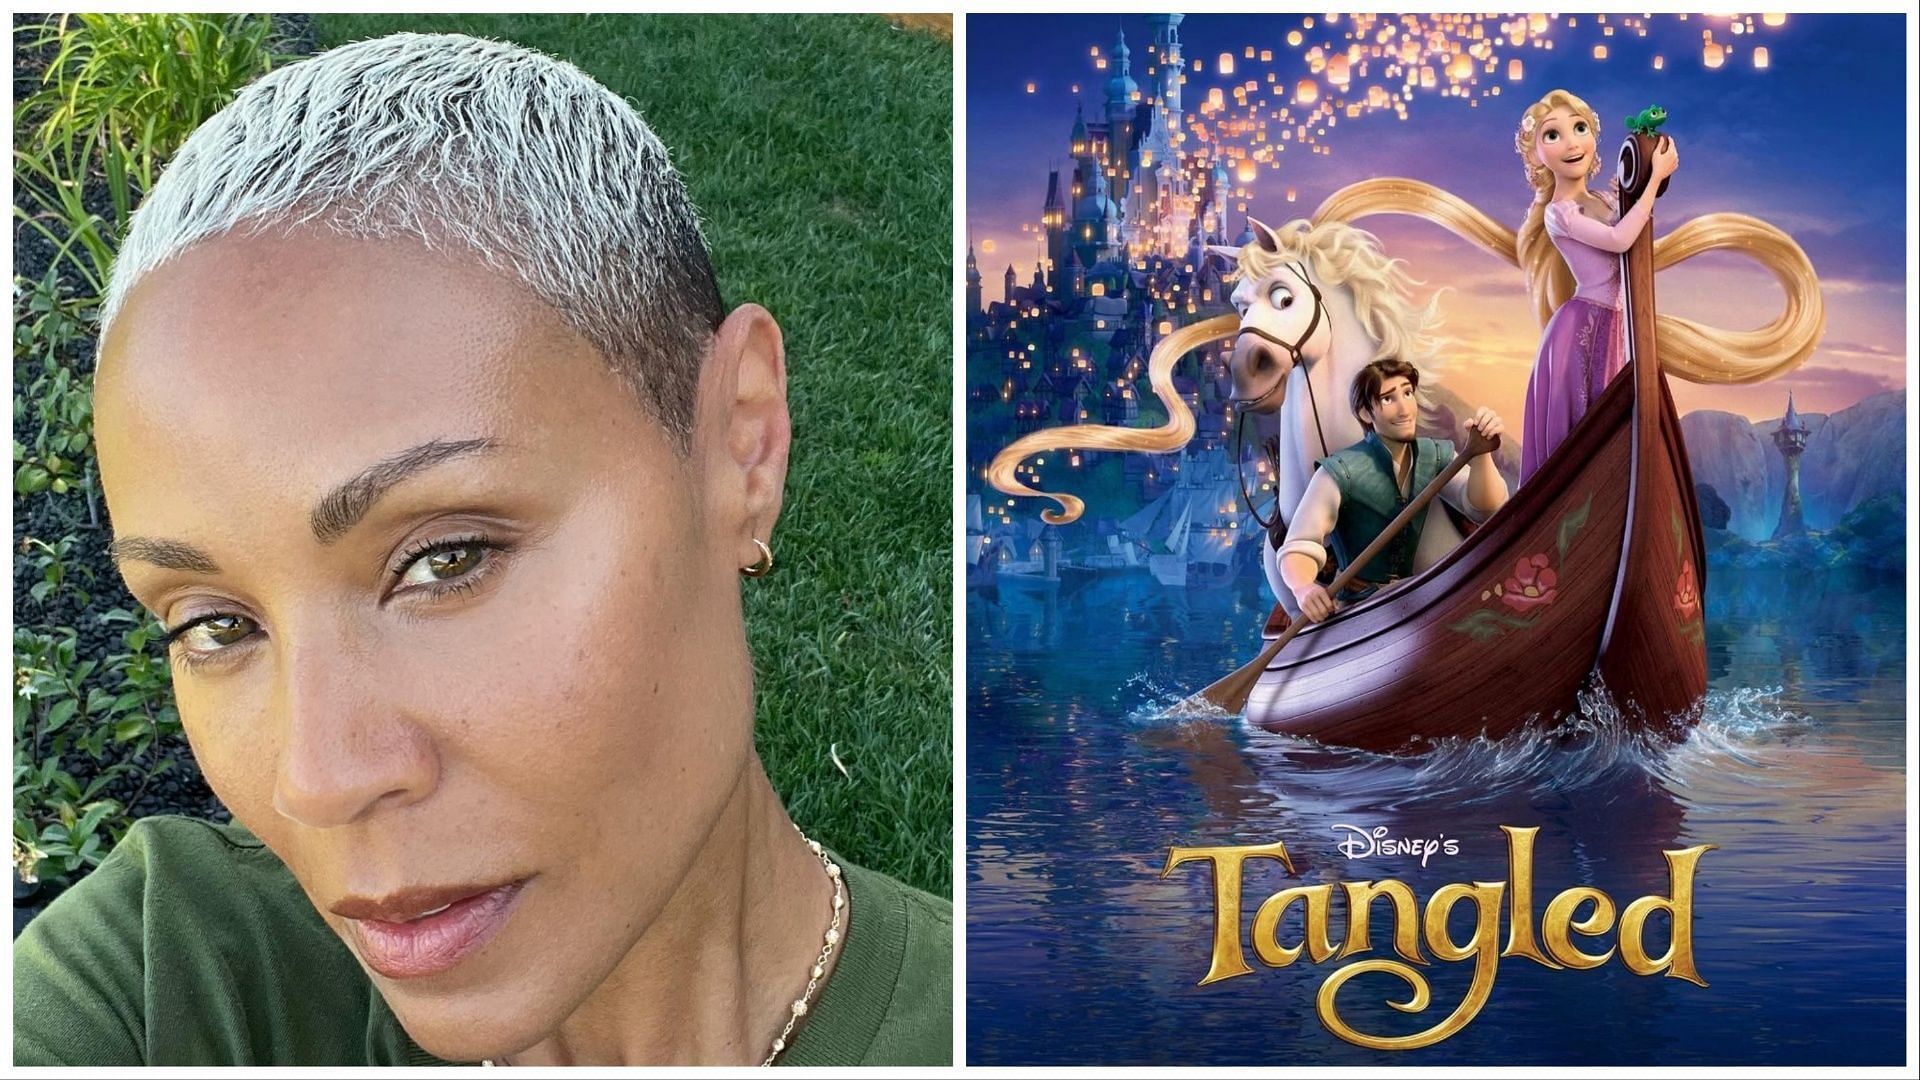 Who Should Be in the Cast of a Live Action 'Tangled?